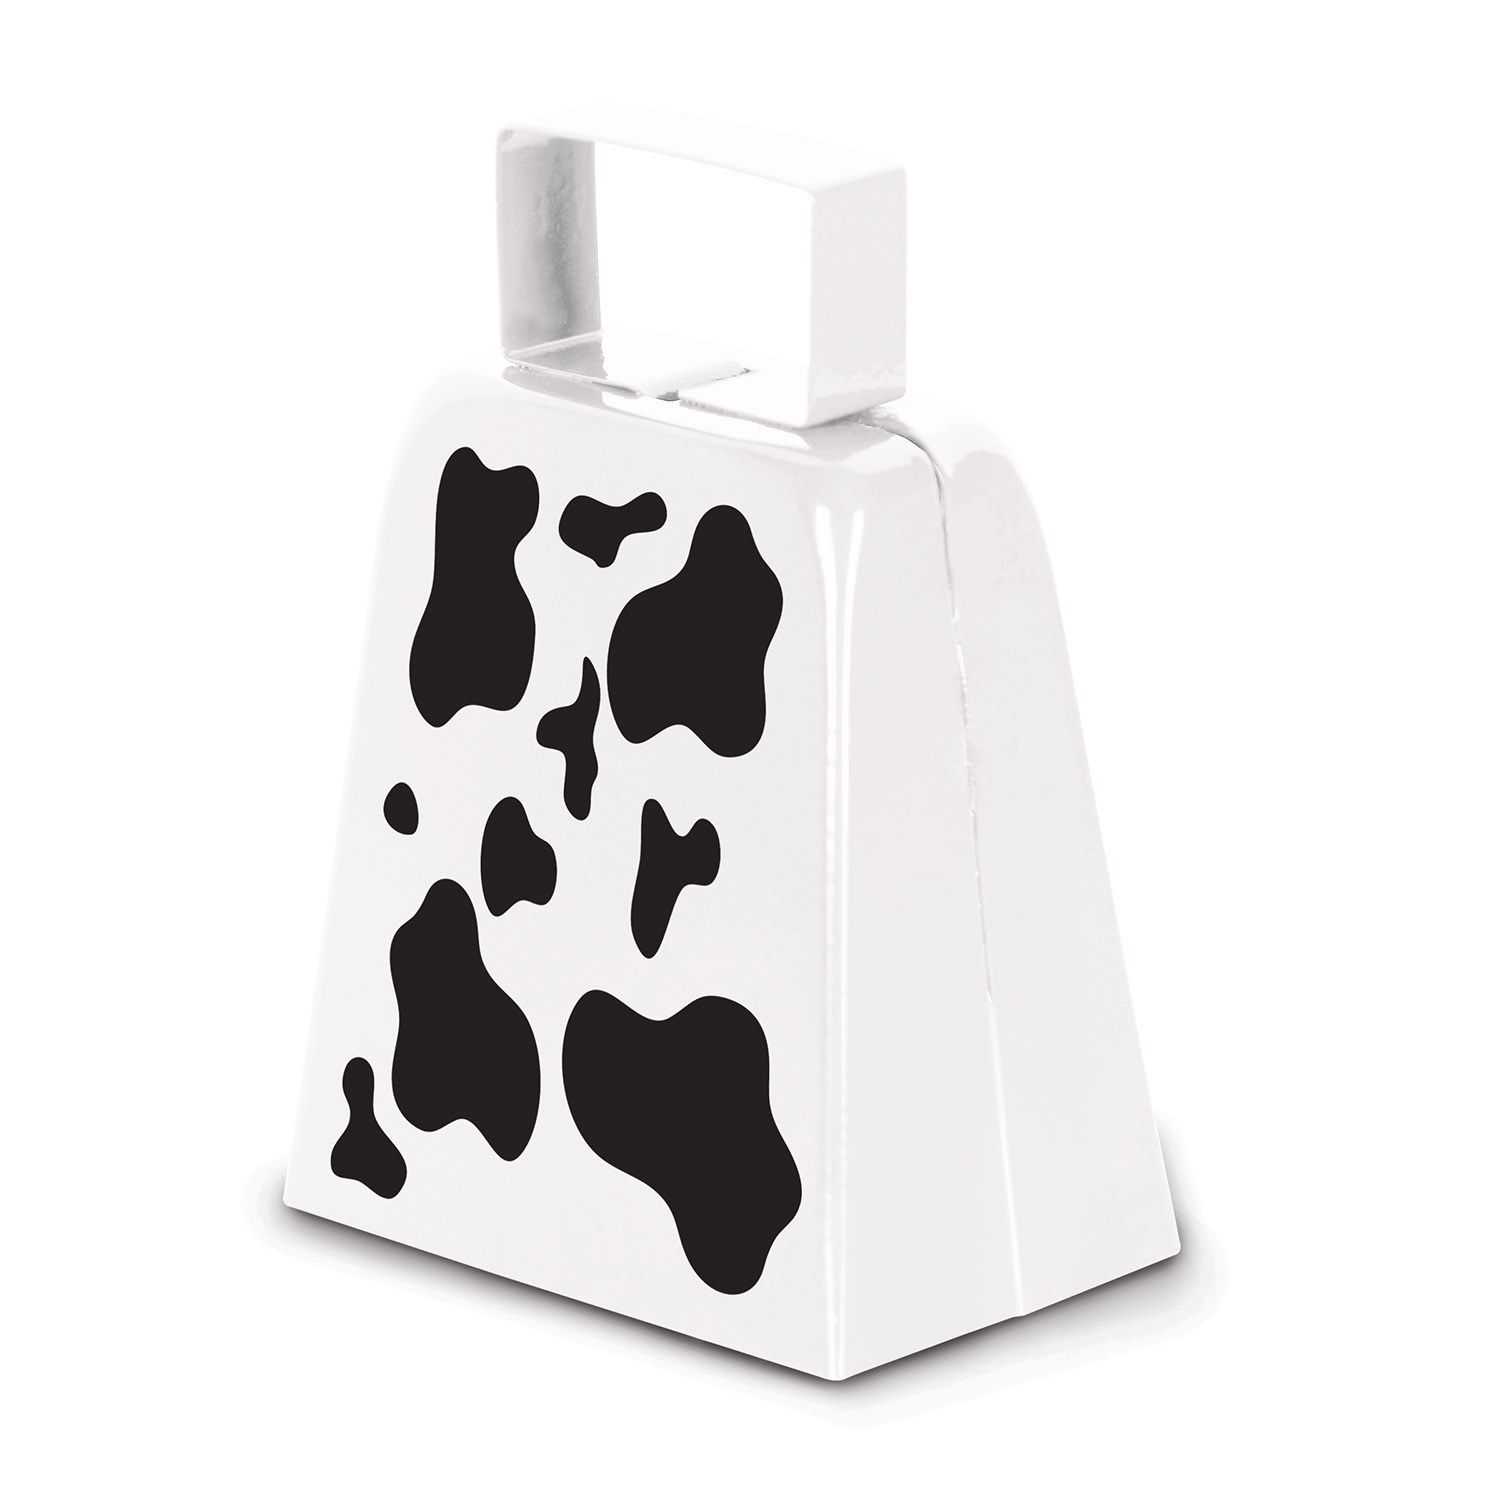 White metal cowbell with a bell to ring and black cow spots.